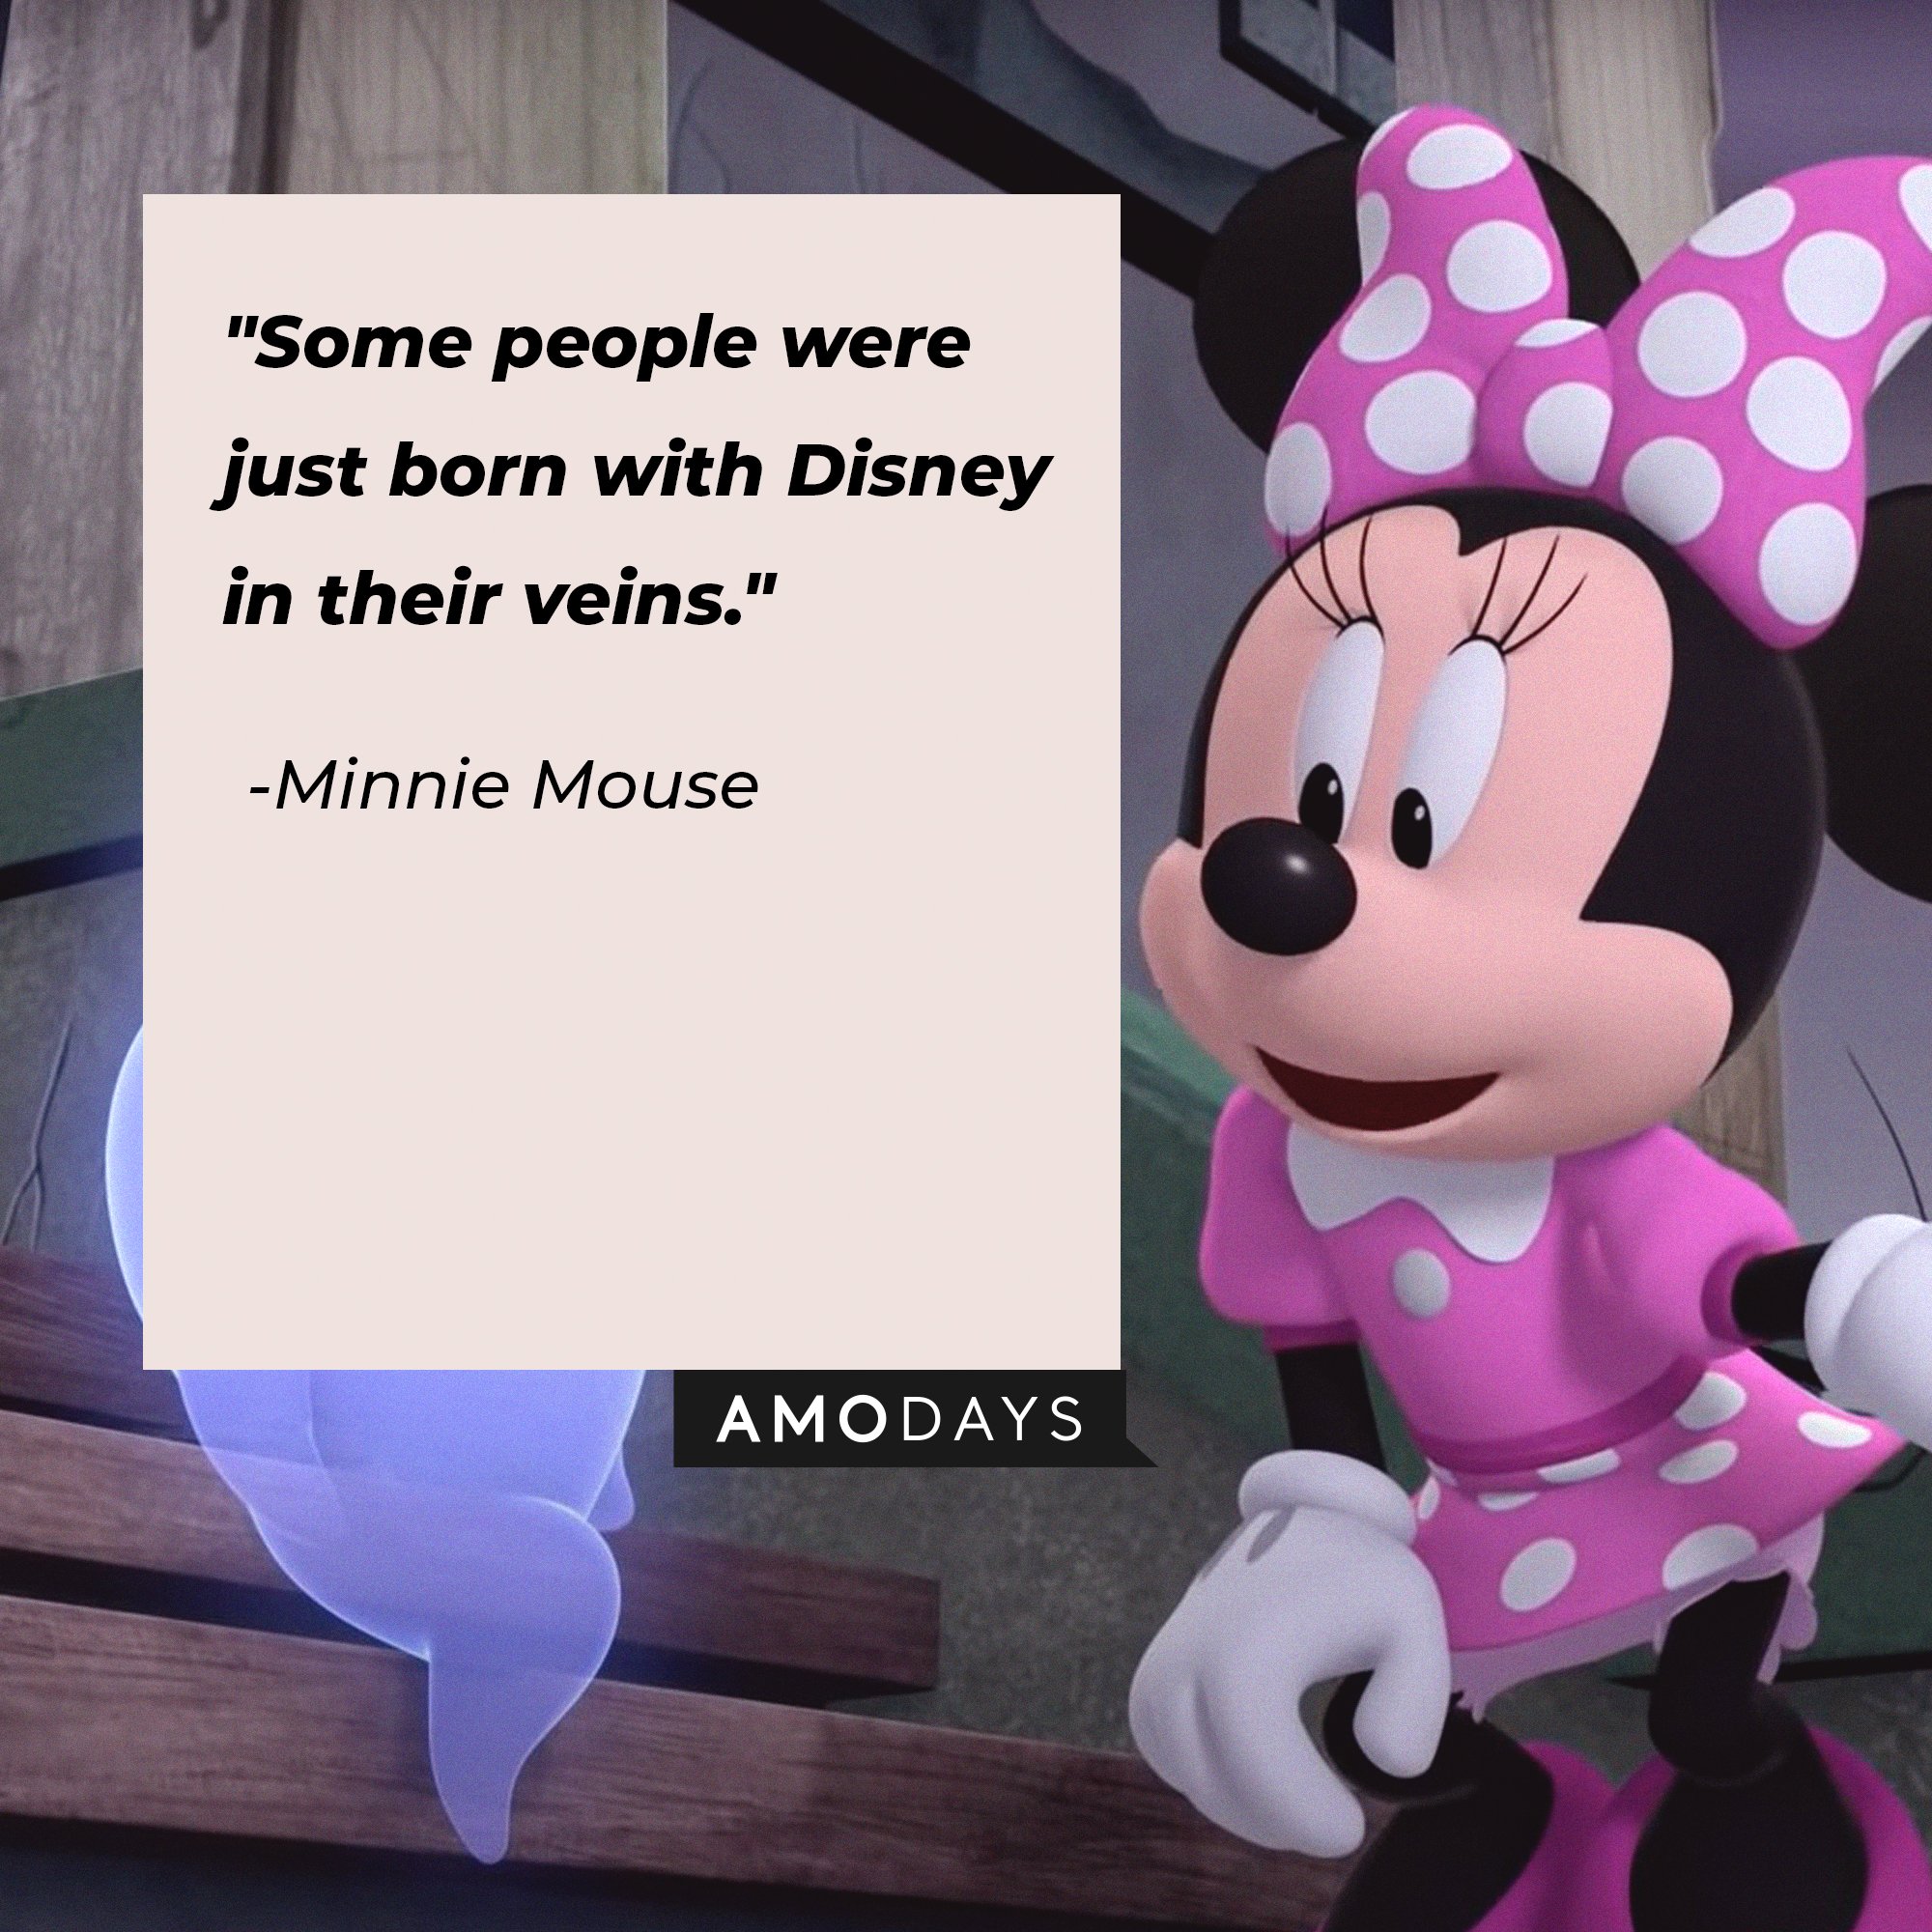 Minnie Mouse’s quote: "Some people were just born with Disney in their veins." | Image: AmoDays